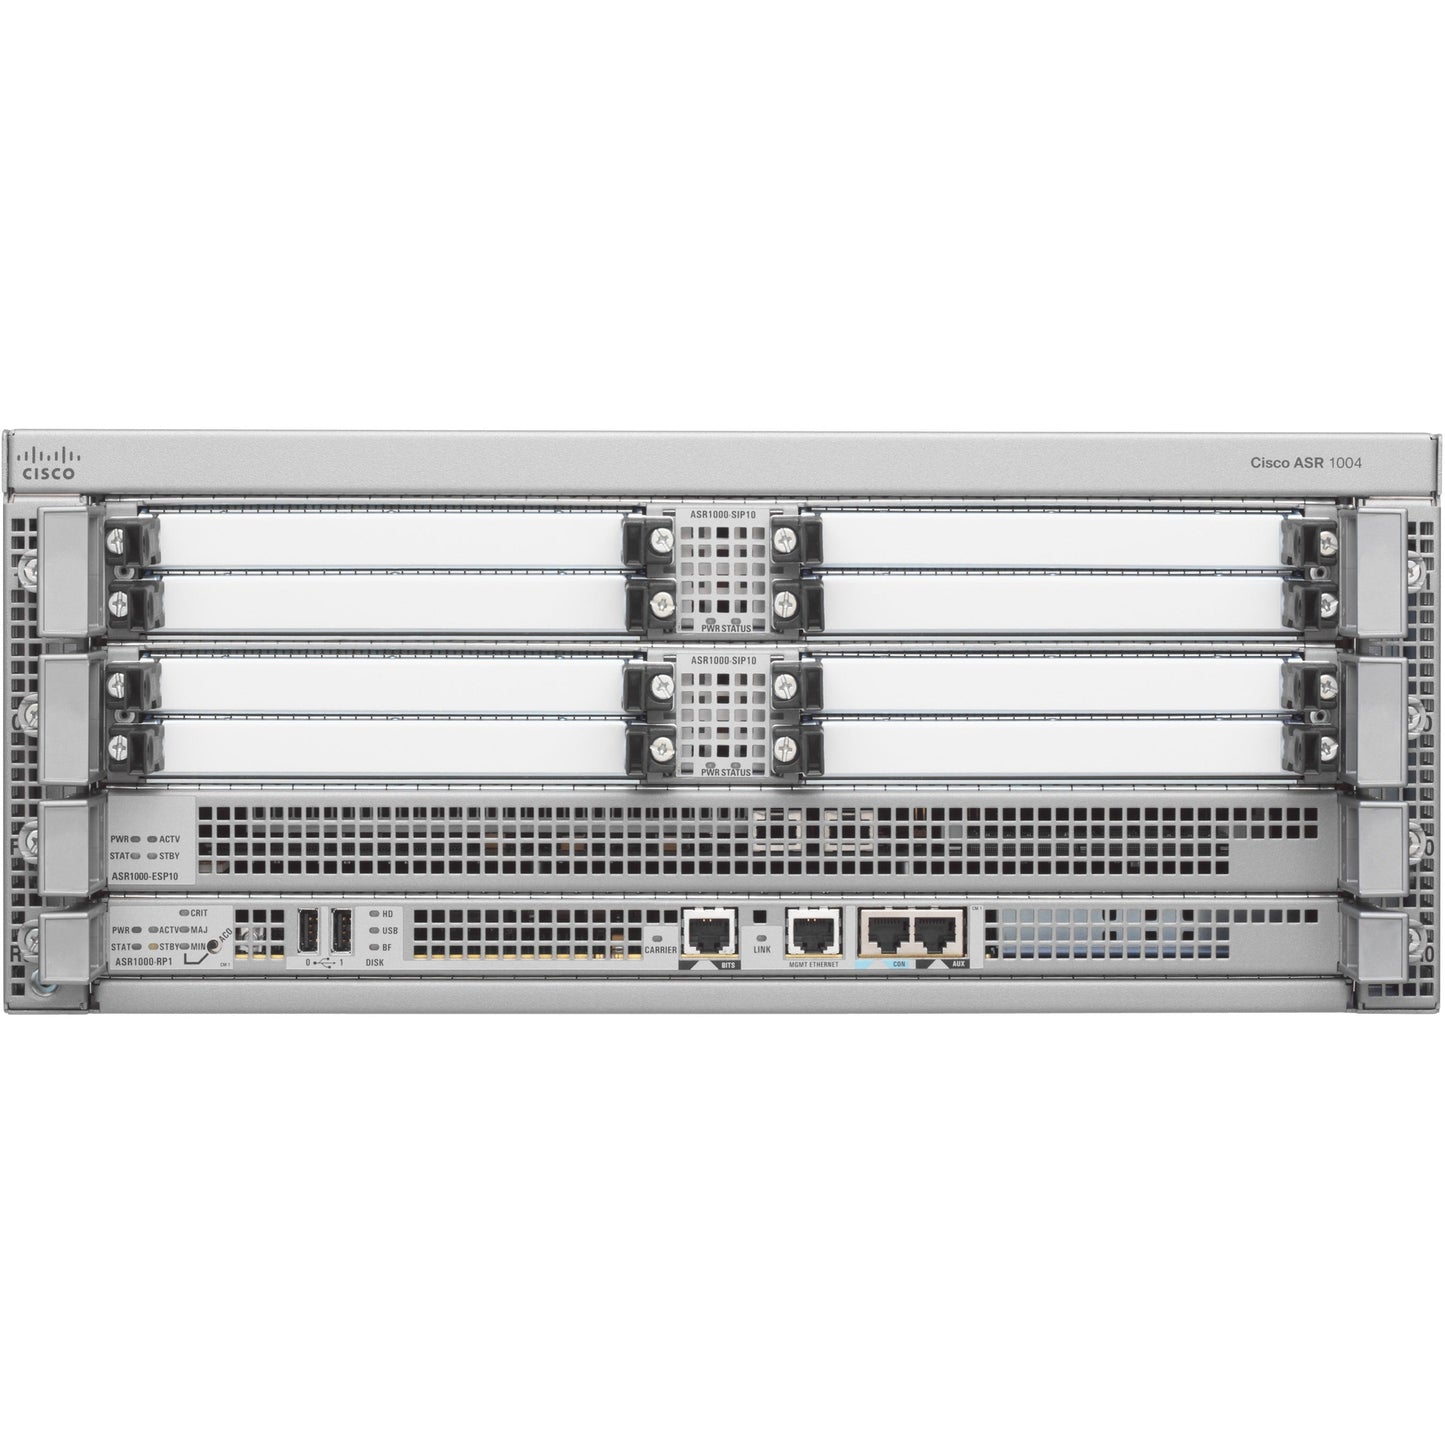 Cisco ONE ASR 1004 Router Chassis